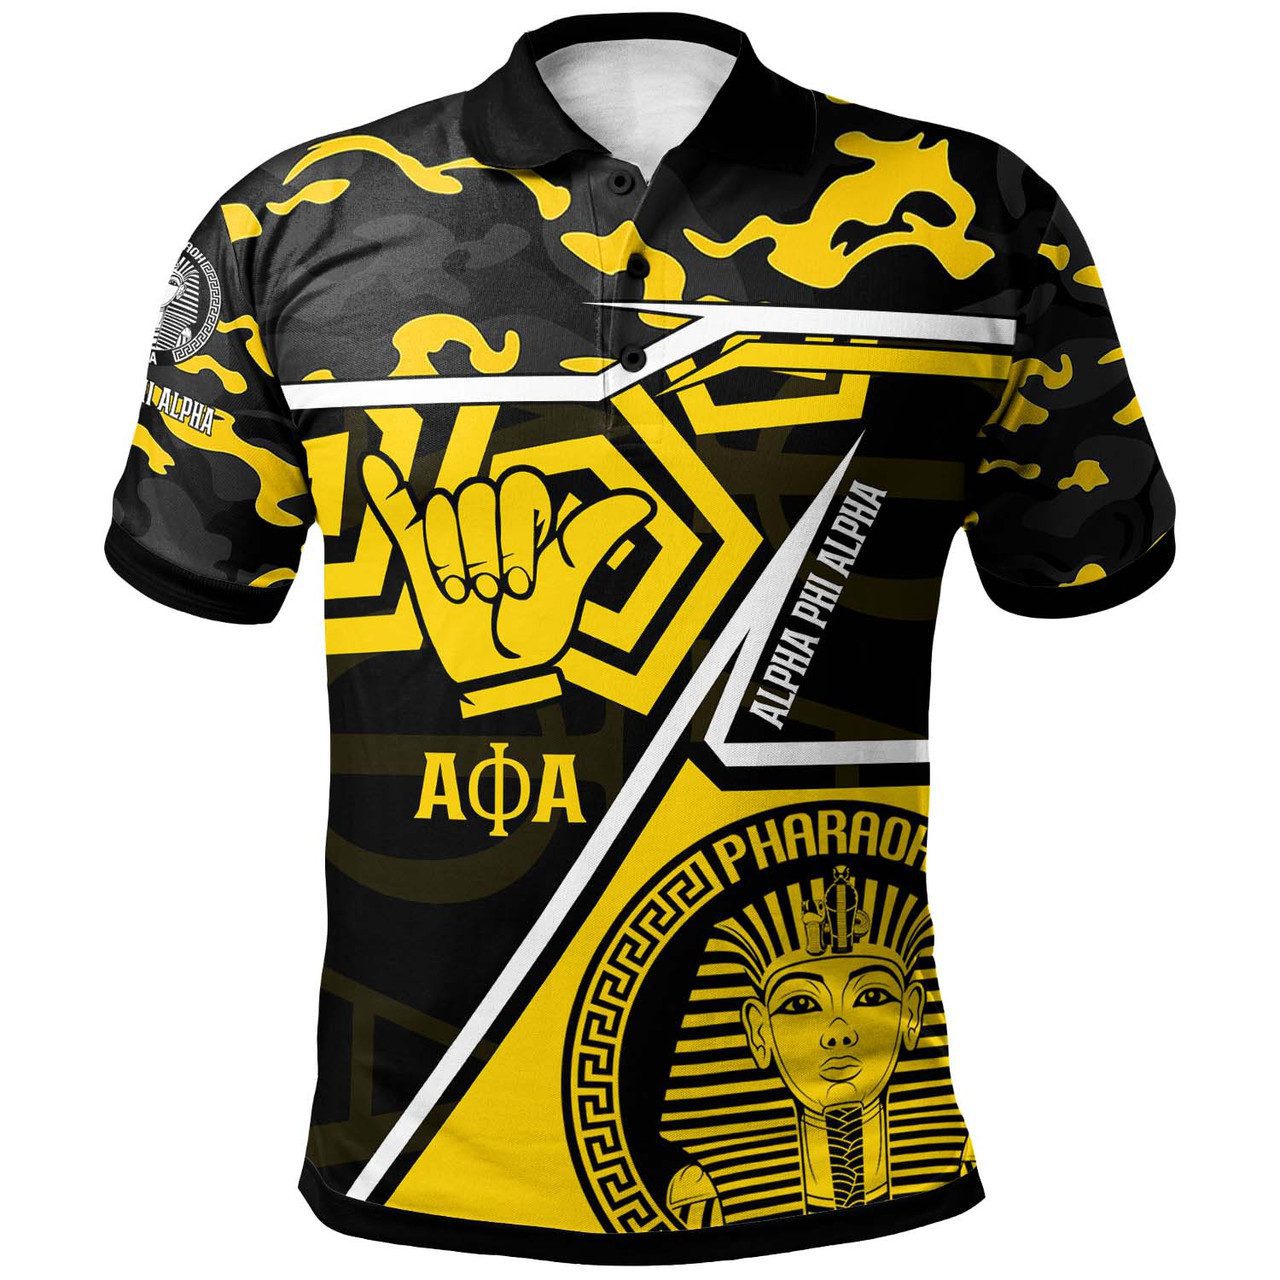 Alpha Phi Alpha Polo Shirt – Fraternity Alpha Phi Alpha Hand Sign with Camouflage Pattern Polo Shirt